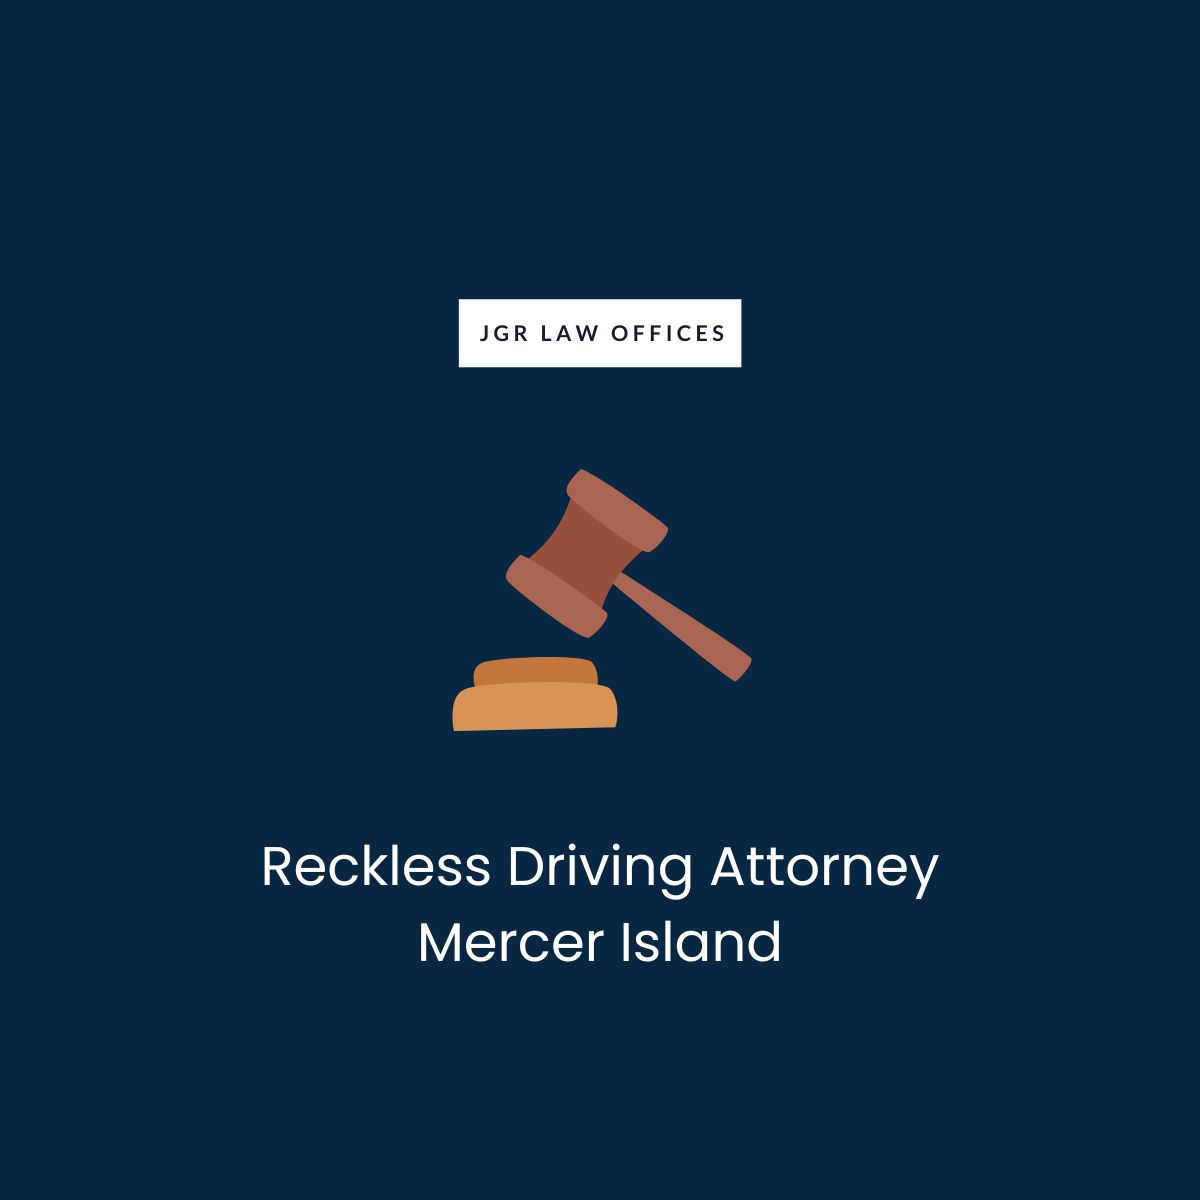 Reckless Driving Lawyer Mercer Island Reckless Driving Reckless Driving